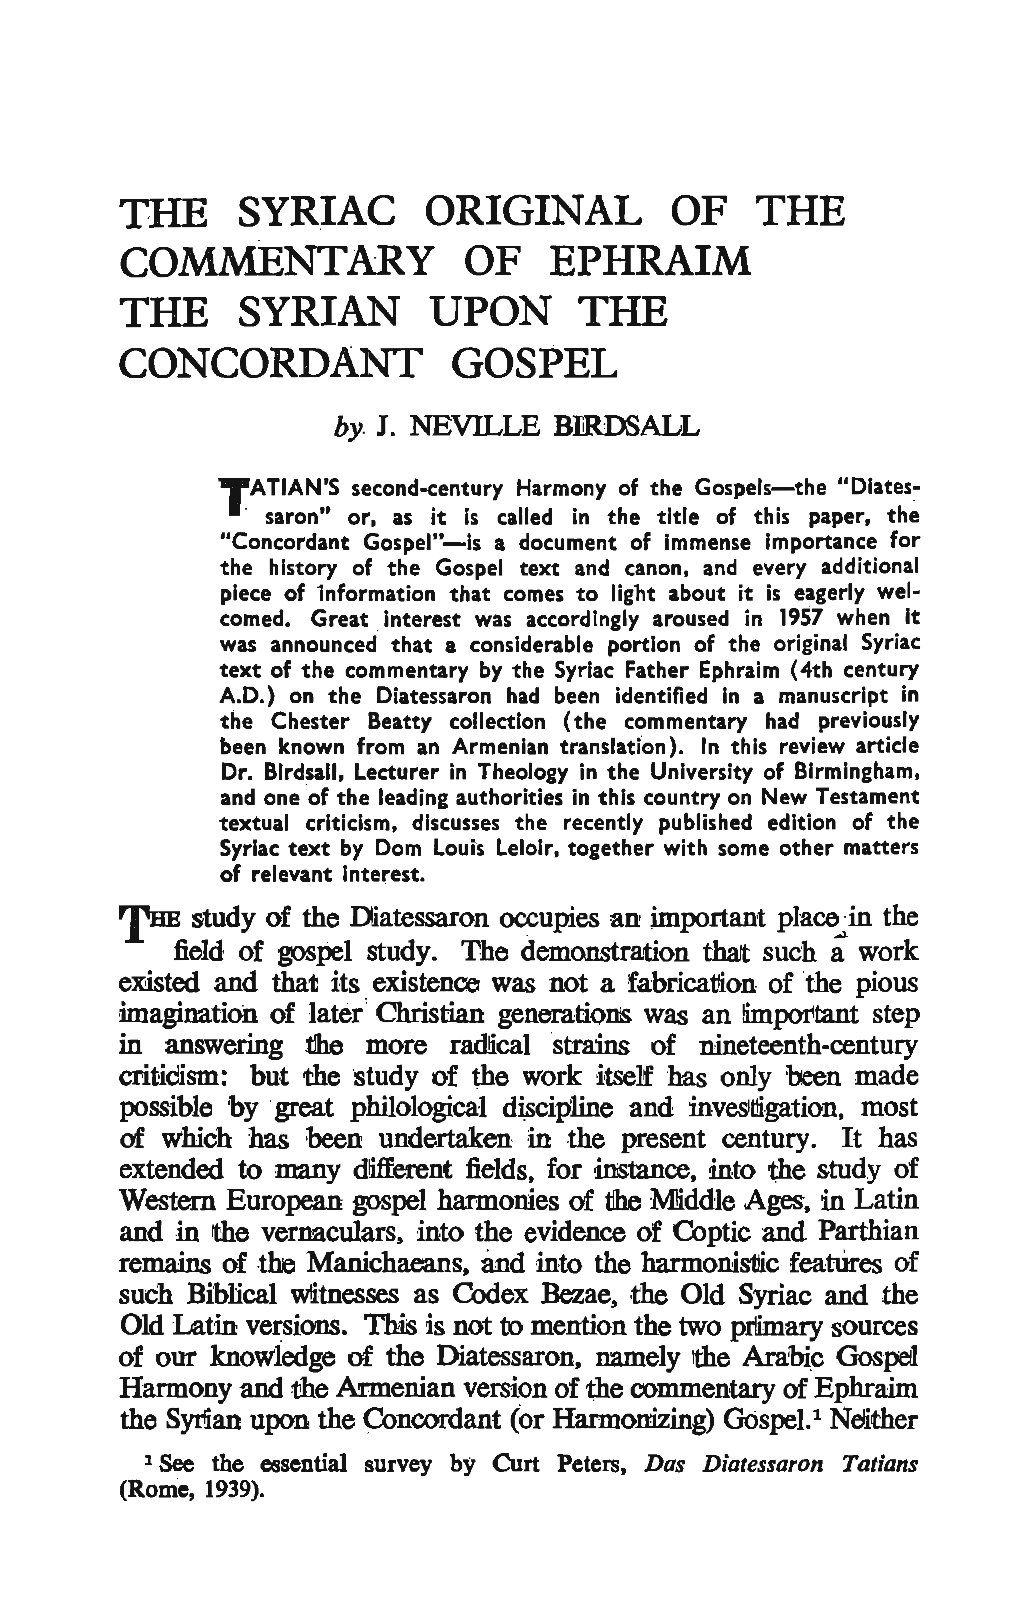 THE SYRIAC ORIGINAL of the COMMENTARY of EPHRAIM the SYRIAN UPON the CONCORDANT GOSPEL By